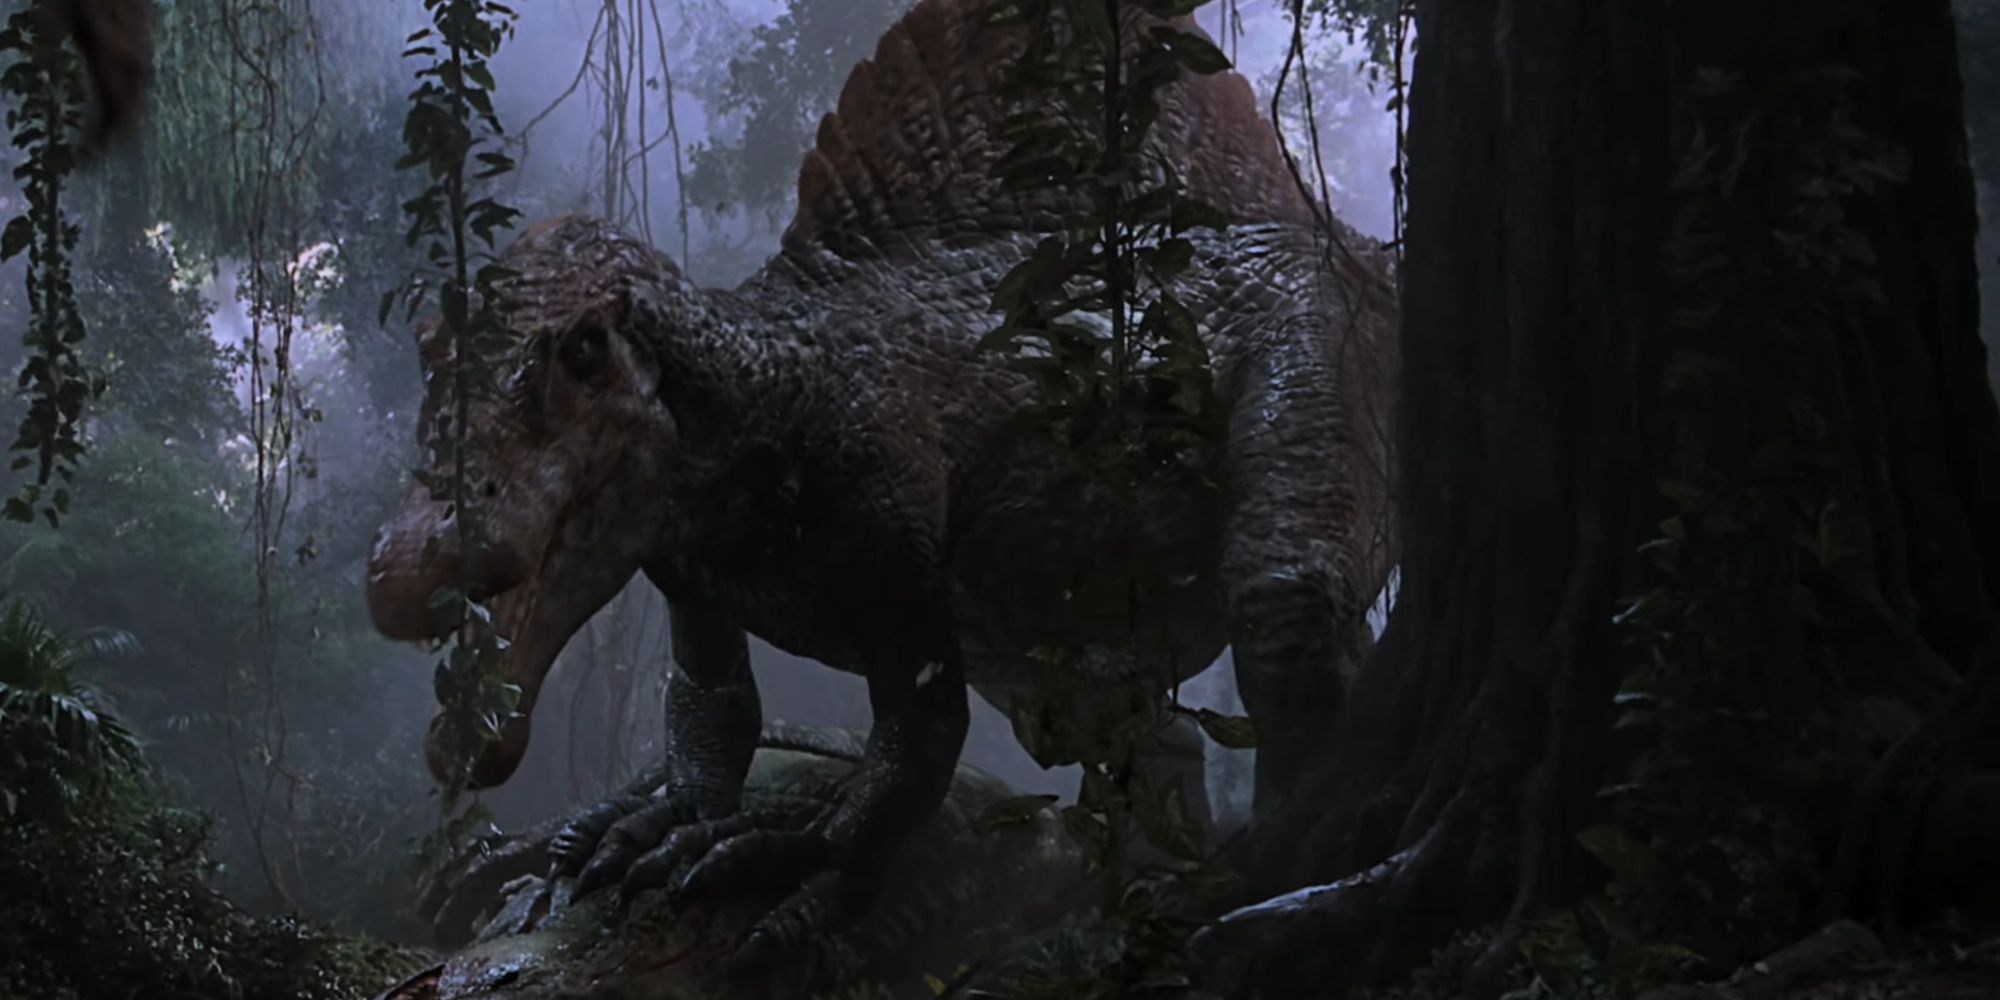 The Spinosaurus standing over the corpse of the T-Rex in Jurassic Park III